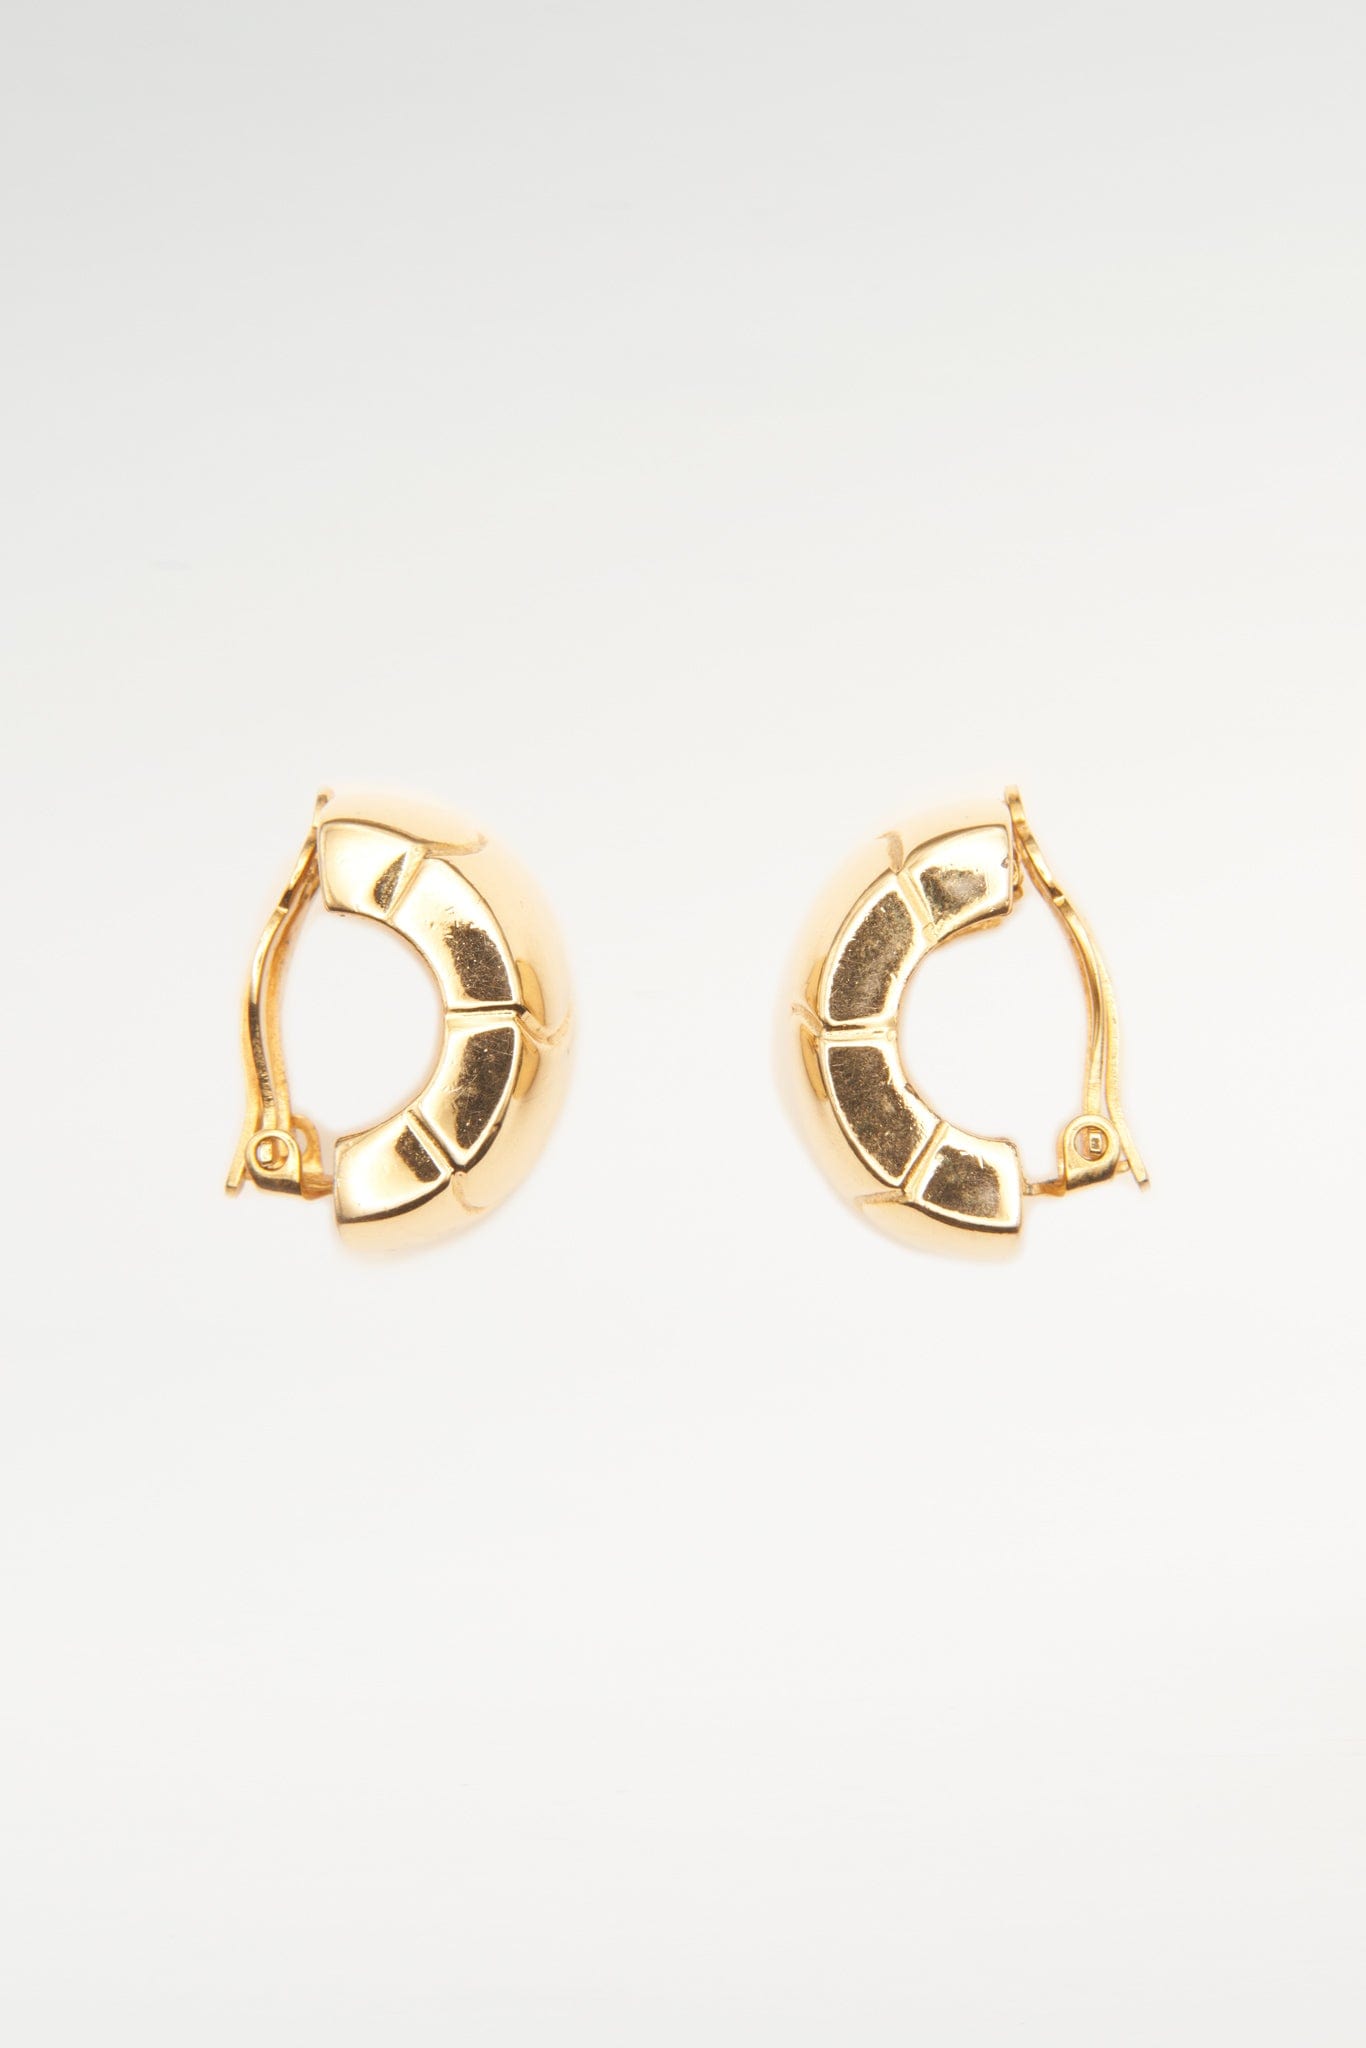 Vintage Gold Givenchy Hoop Earrings